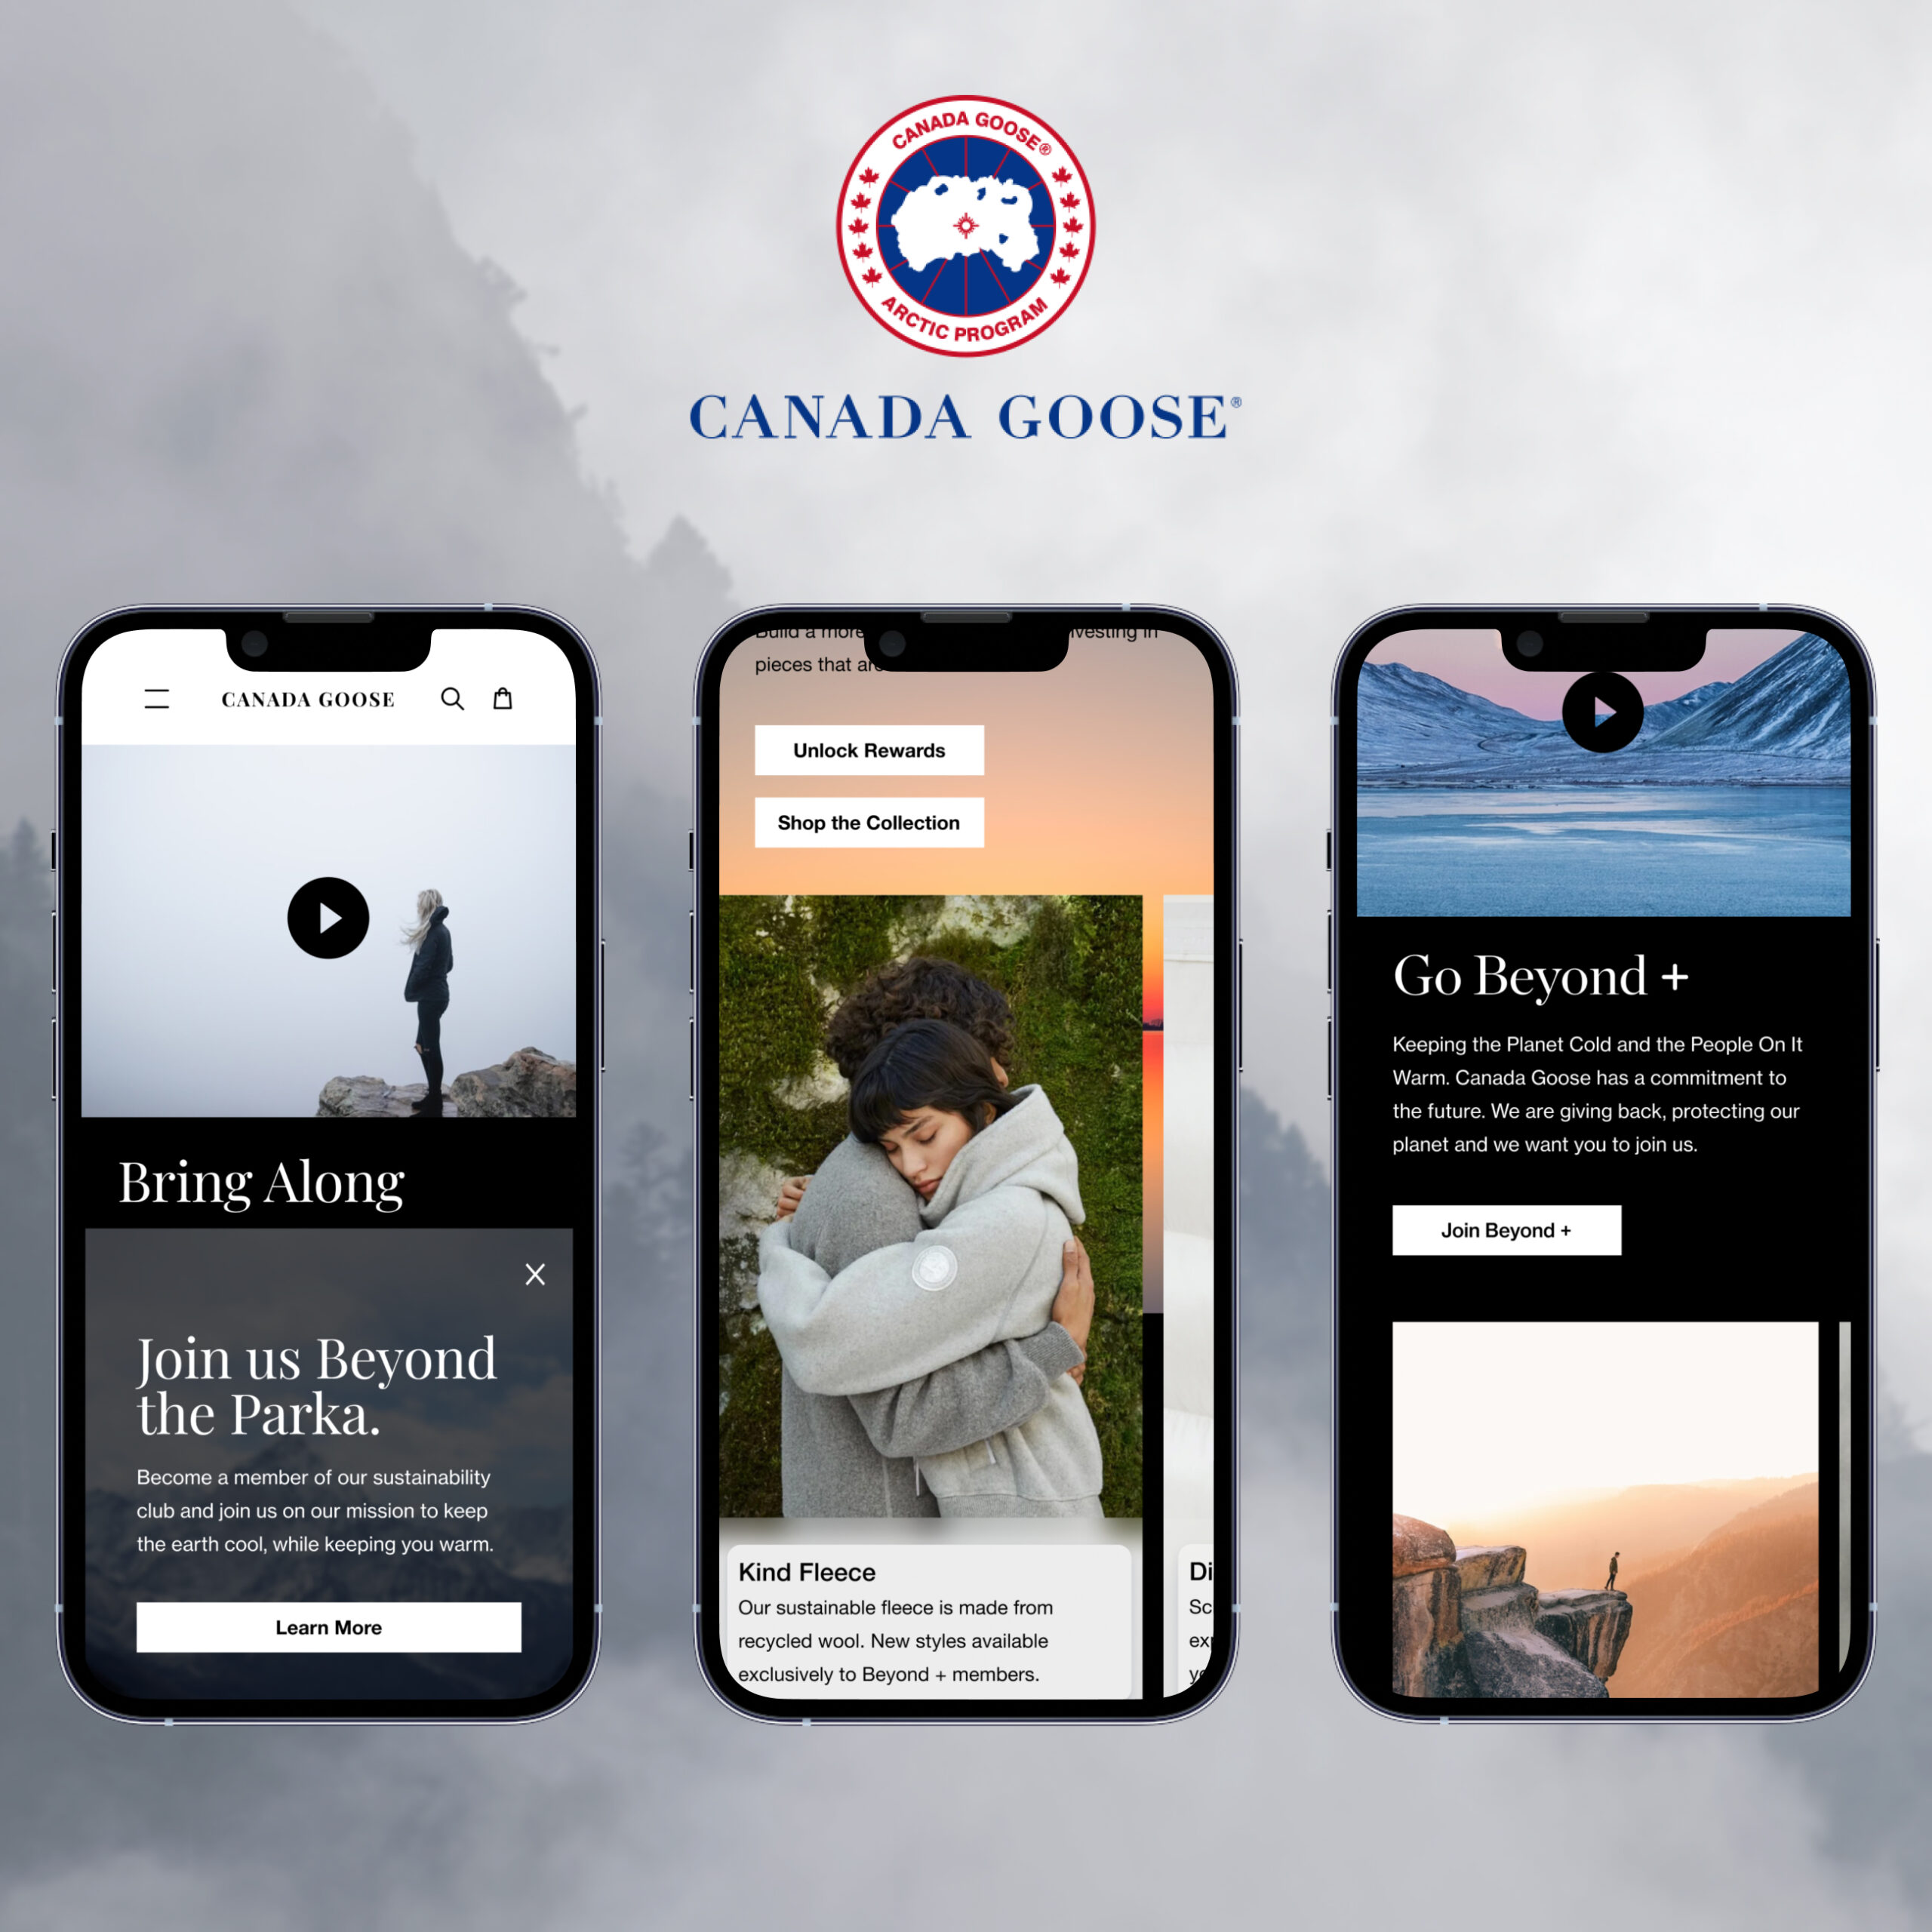 Beyond Plus for Canada Goose